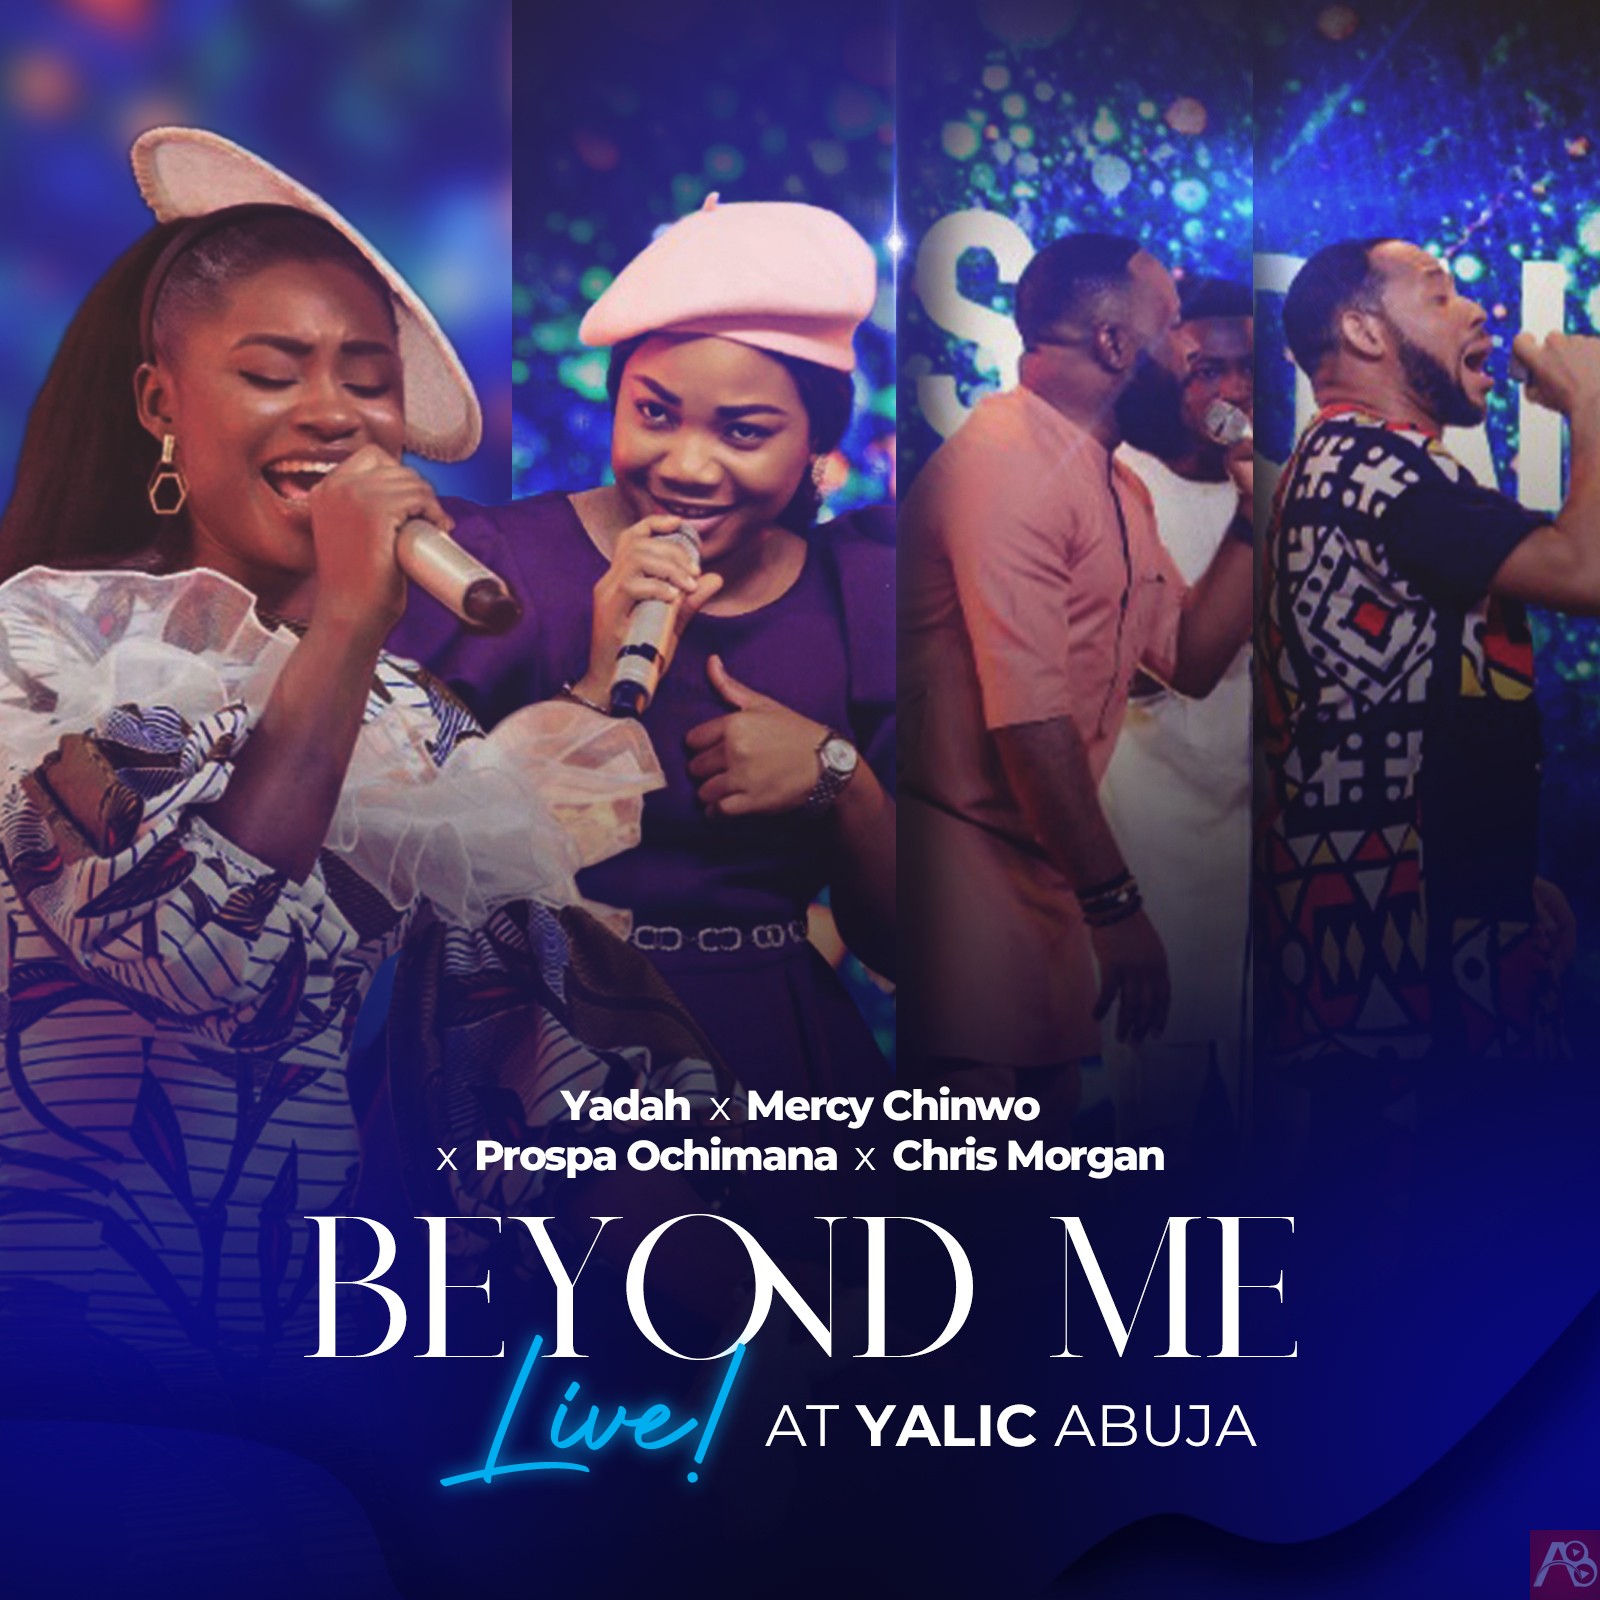 Beyond Me by Yadah ft Mercy Chinwo